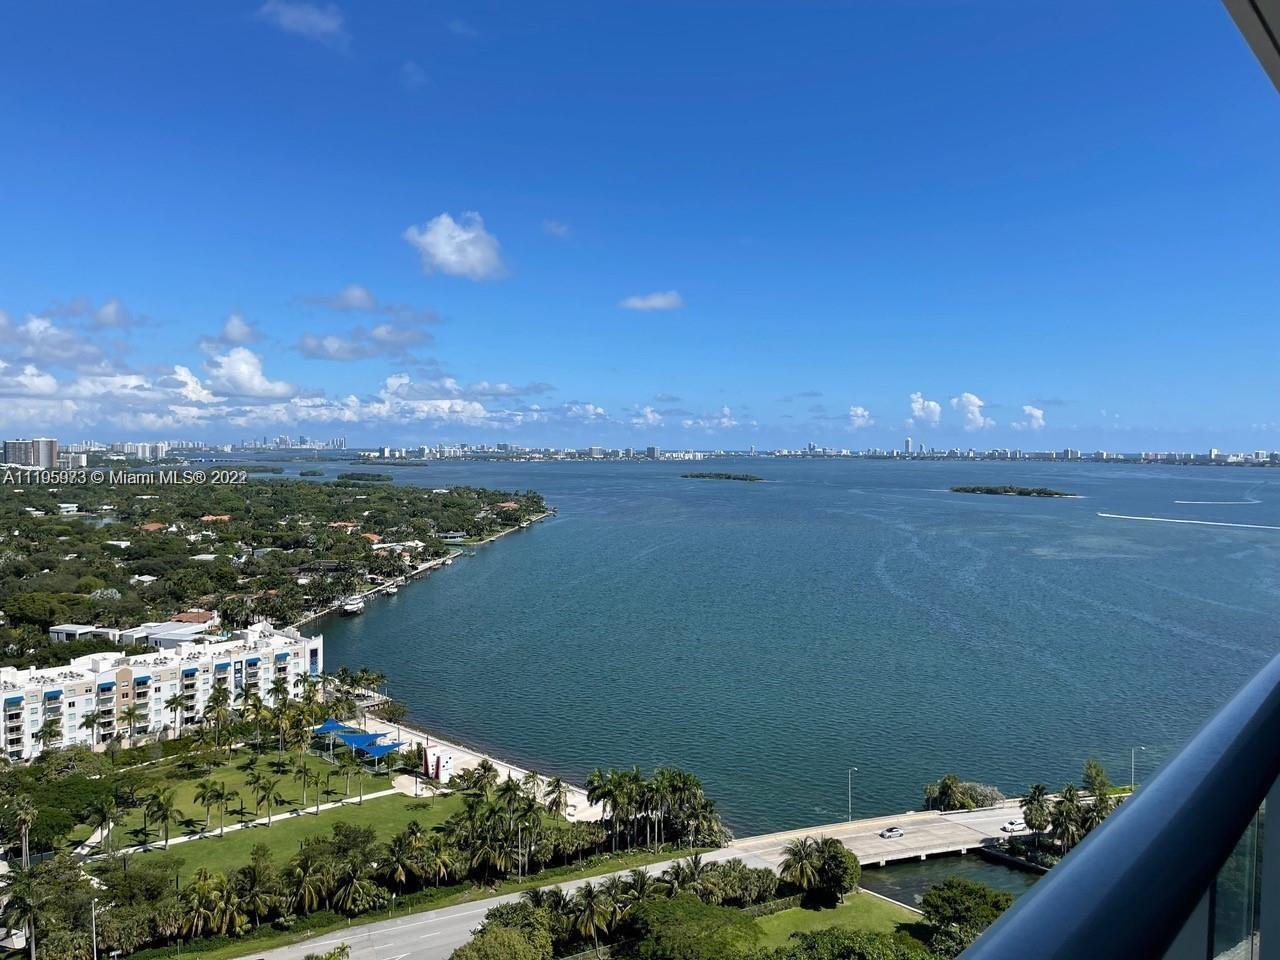 Luxurious 2 bed 2.5 bath. Centrally located with access to all Miami neighborhoods. 1 Parking space 